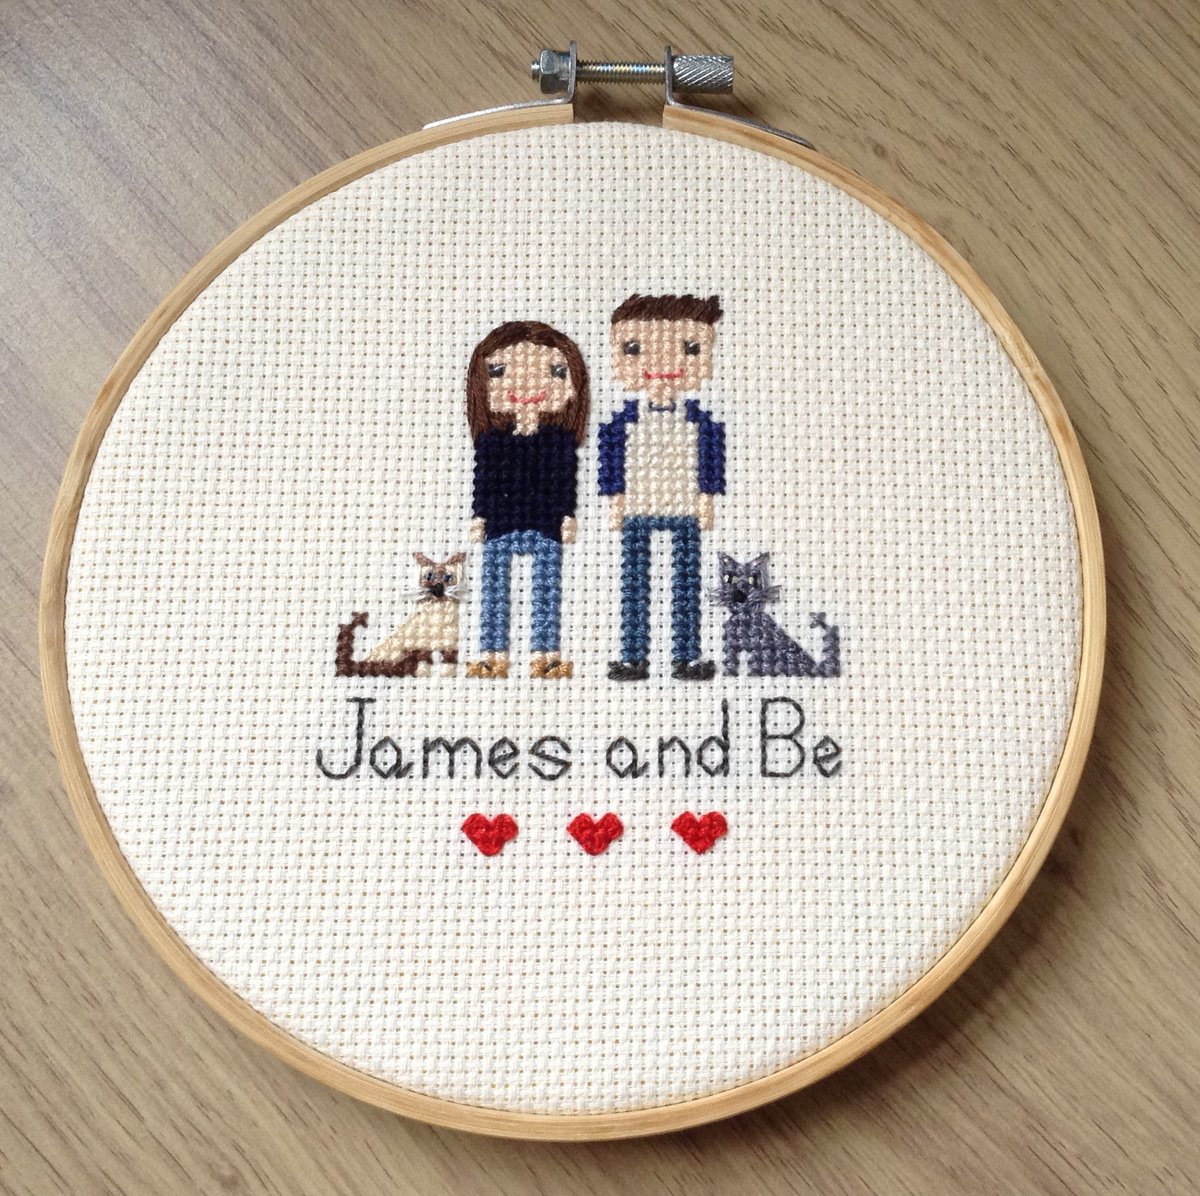 The traditional gift for a second wedding anniversary is cotton and my cute couples portraits are proving popular for anniversary gifts at the moment.
#weddinganniversary #cottonanniversary #secondweddinganniversary #UKEtsyRT #UKGiftHour #UKGiftAM #shopindie #UKCraftersHour